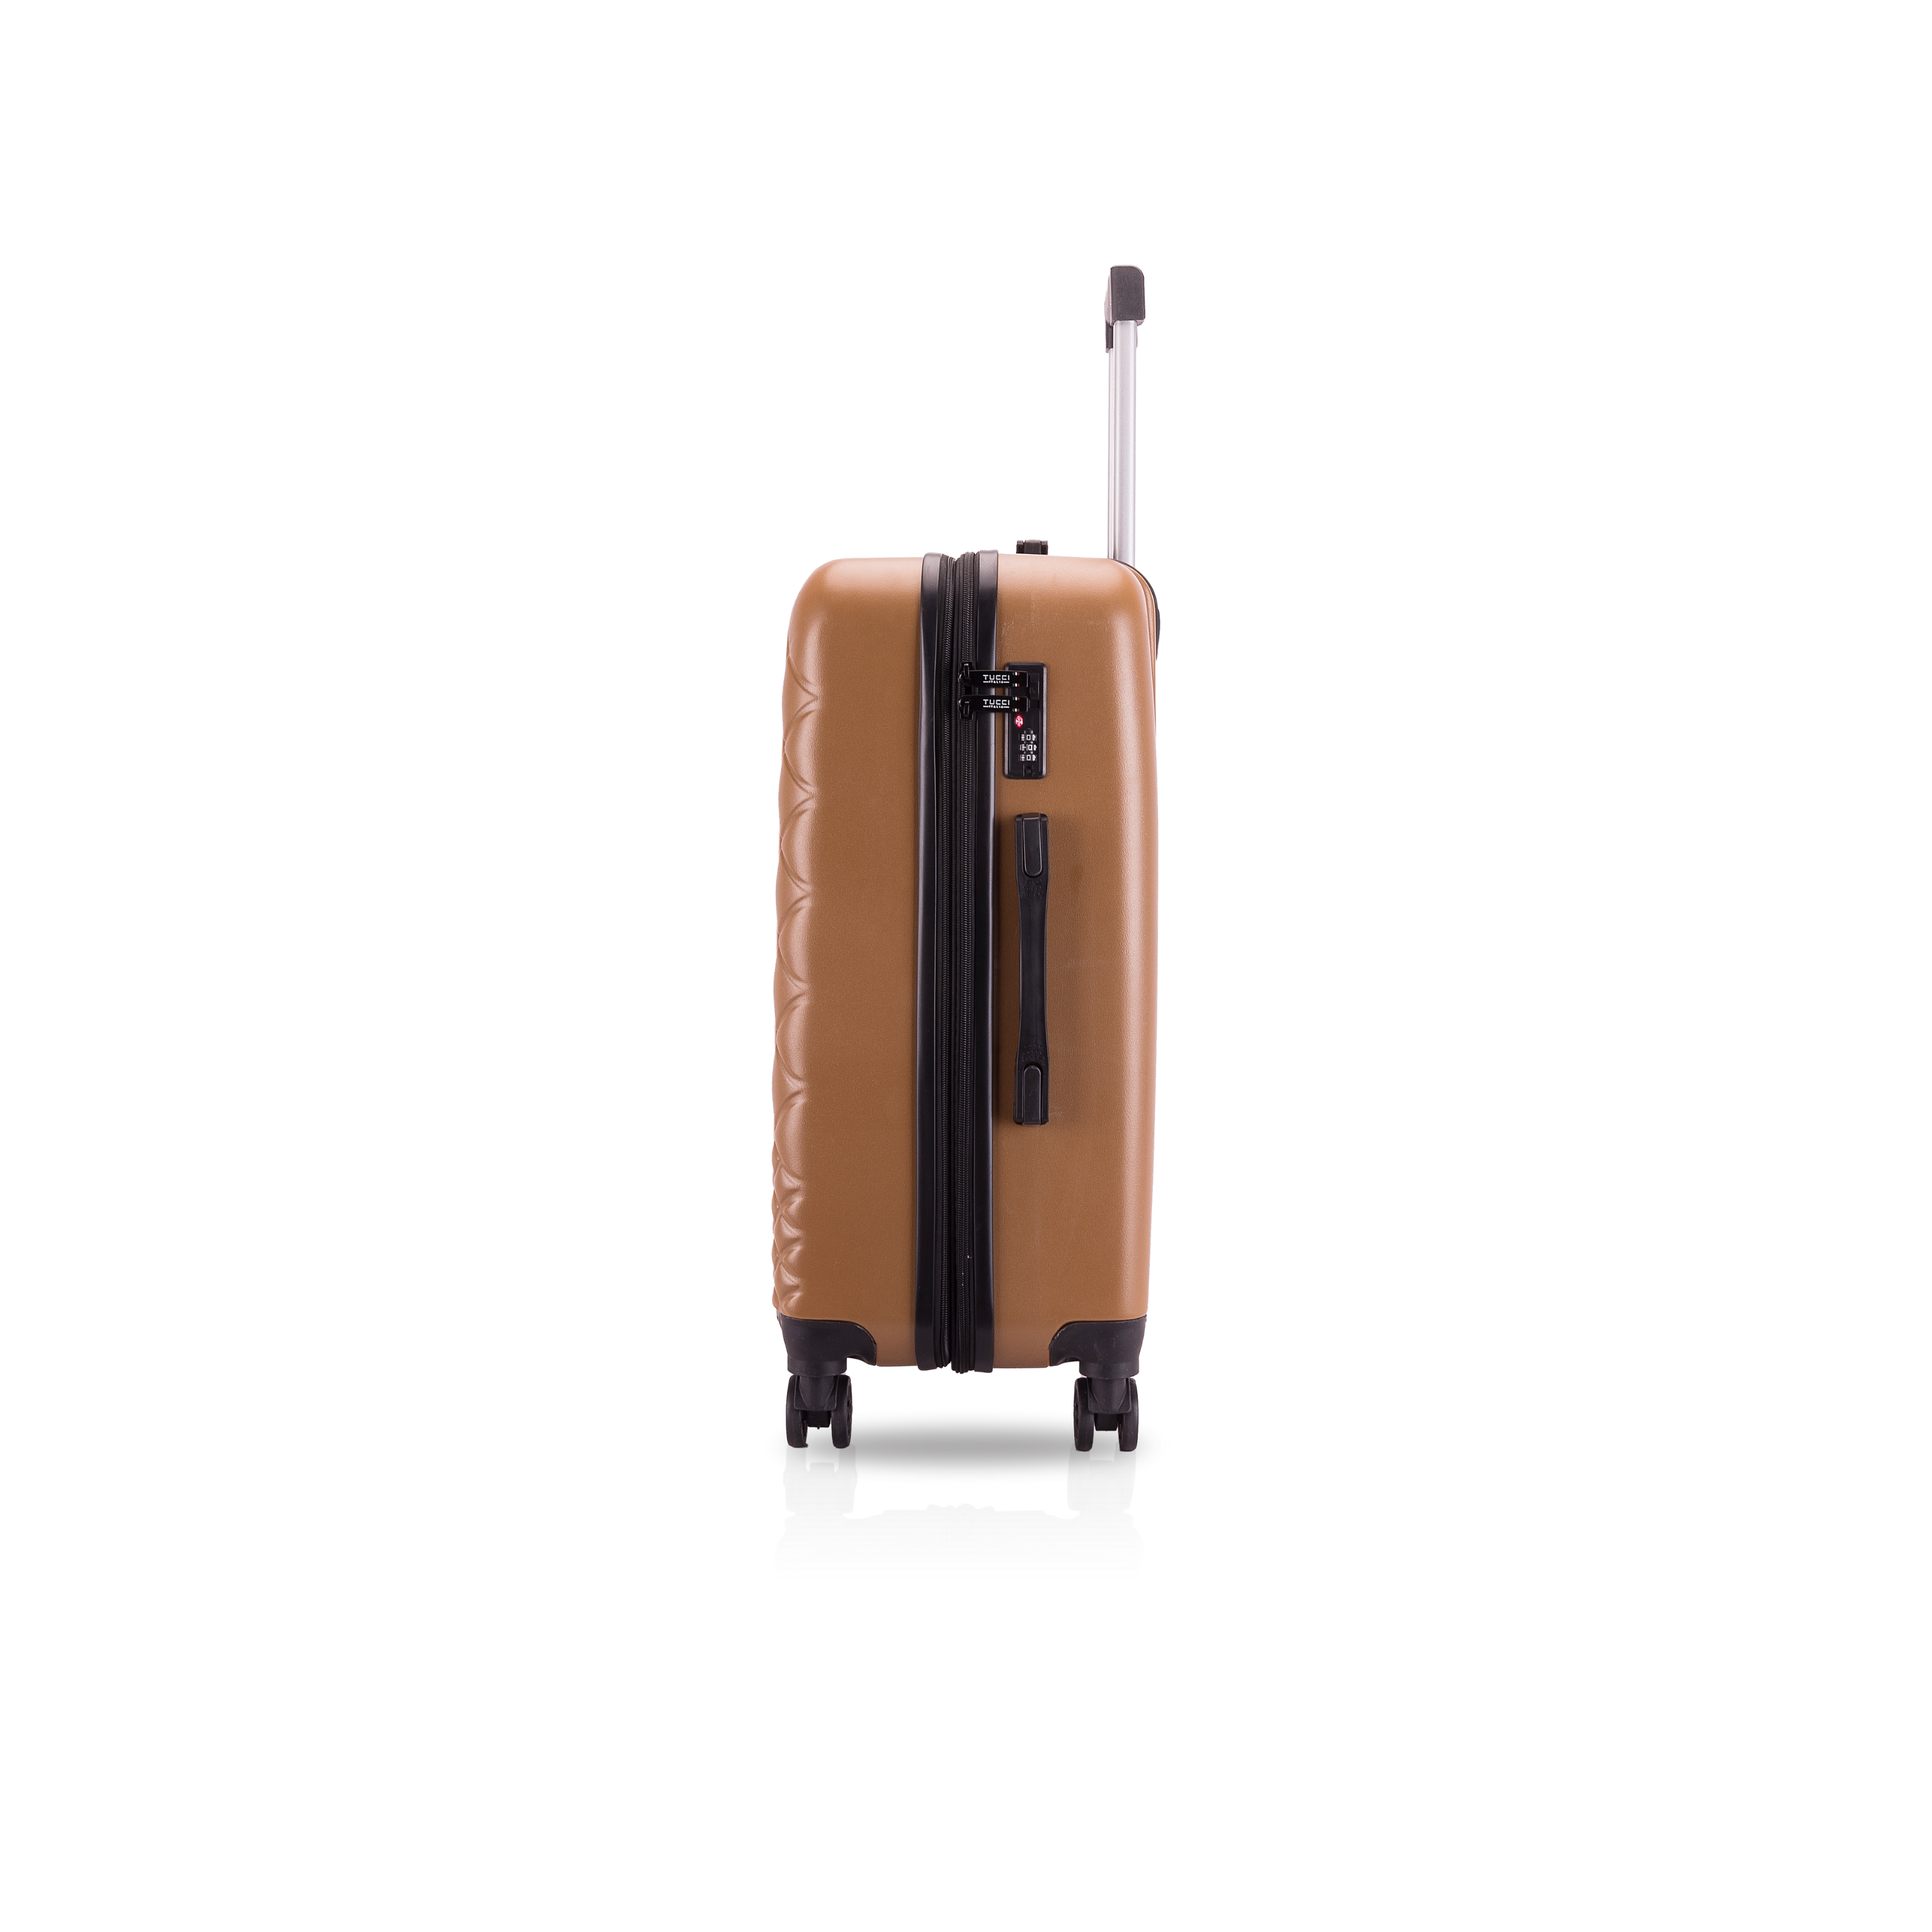 TUCCI Italy TRAPUNTA ABS 20" Carry On Luggage Suitcase